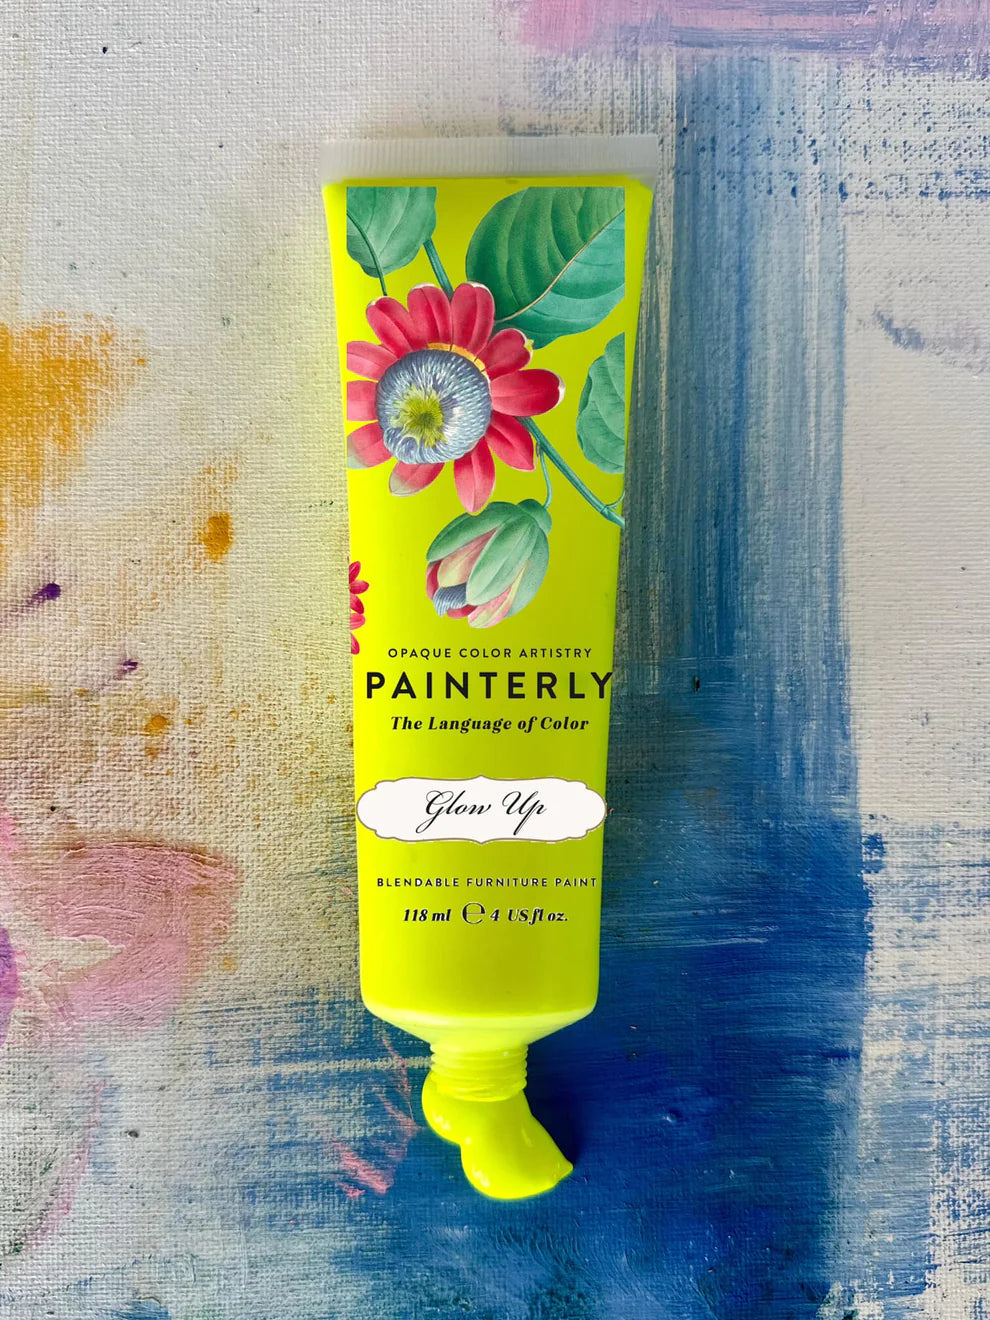 Glow Up - Painterly Collection Blendable Furniture Paint by DIY Paint